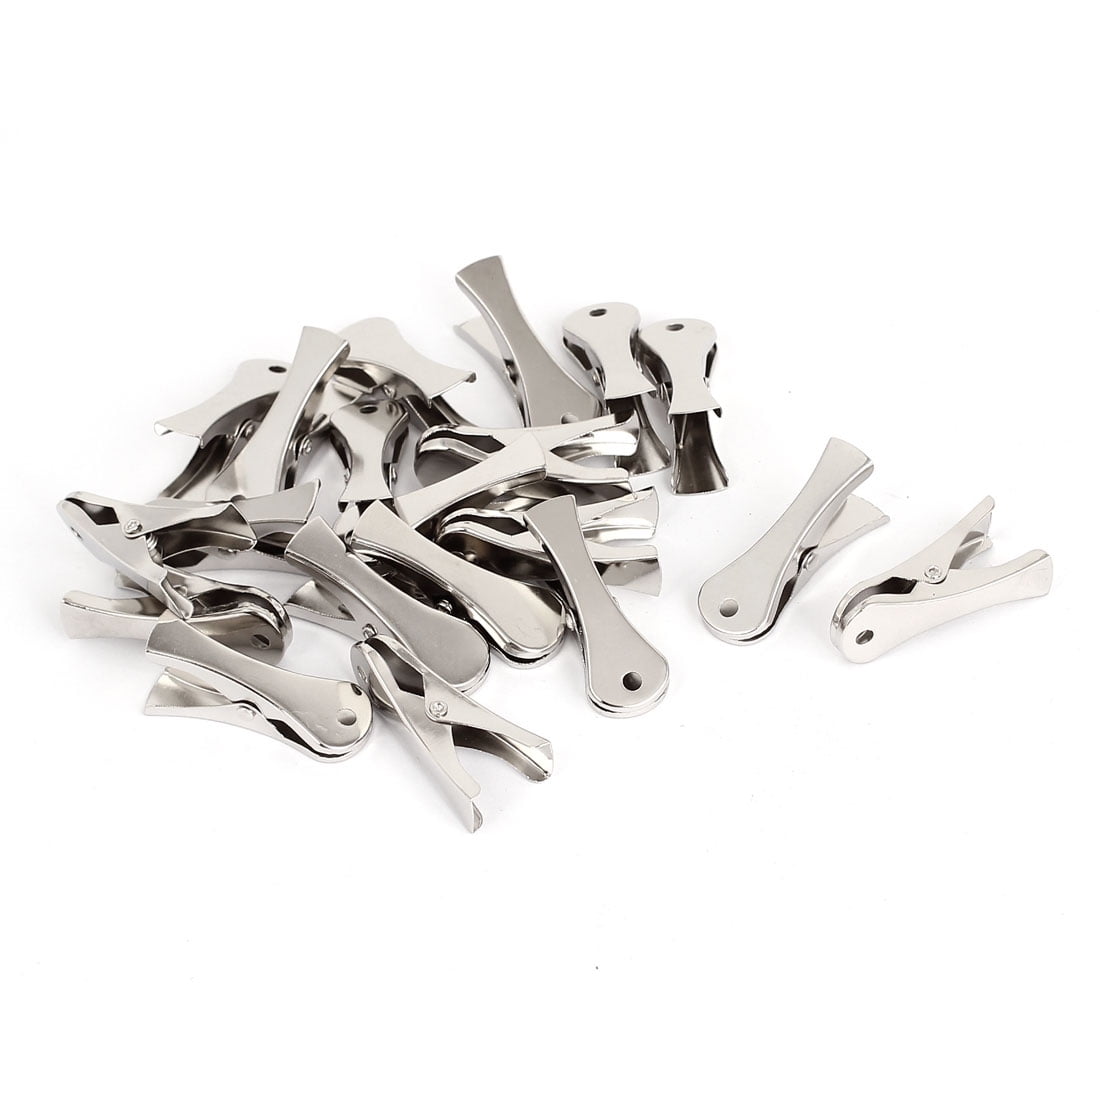 40-200pcs Stainless Steel Clothes Pegs Clip Pins Hanging Metal Laundry Clamp 